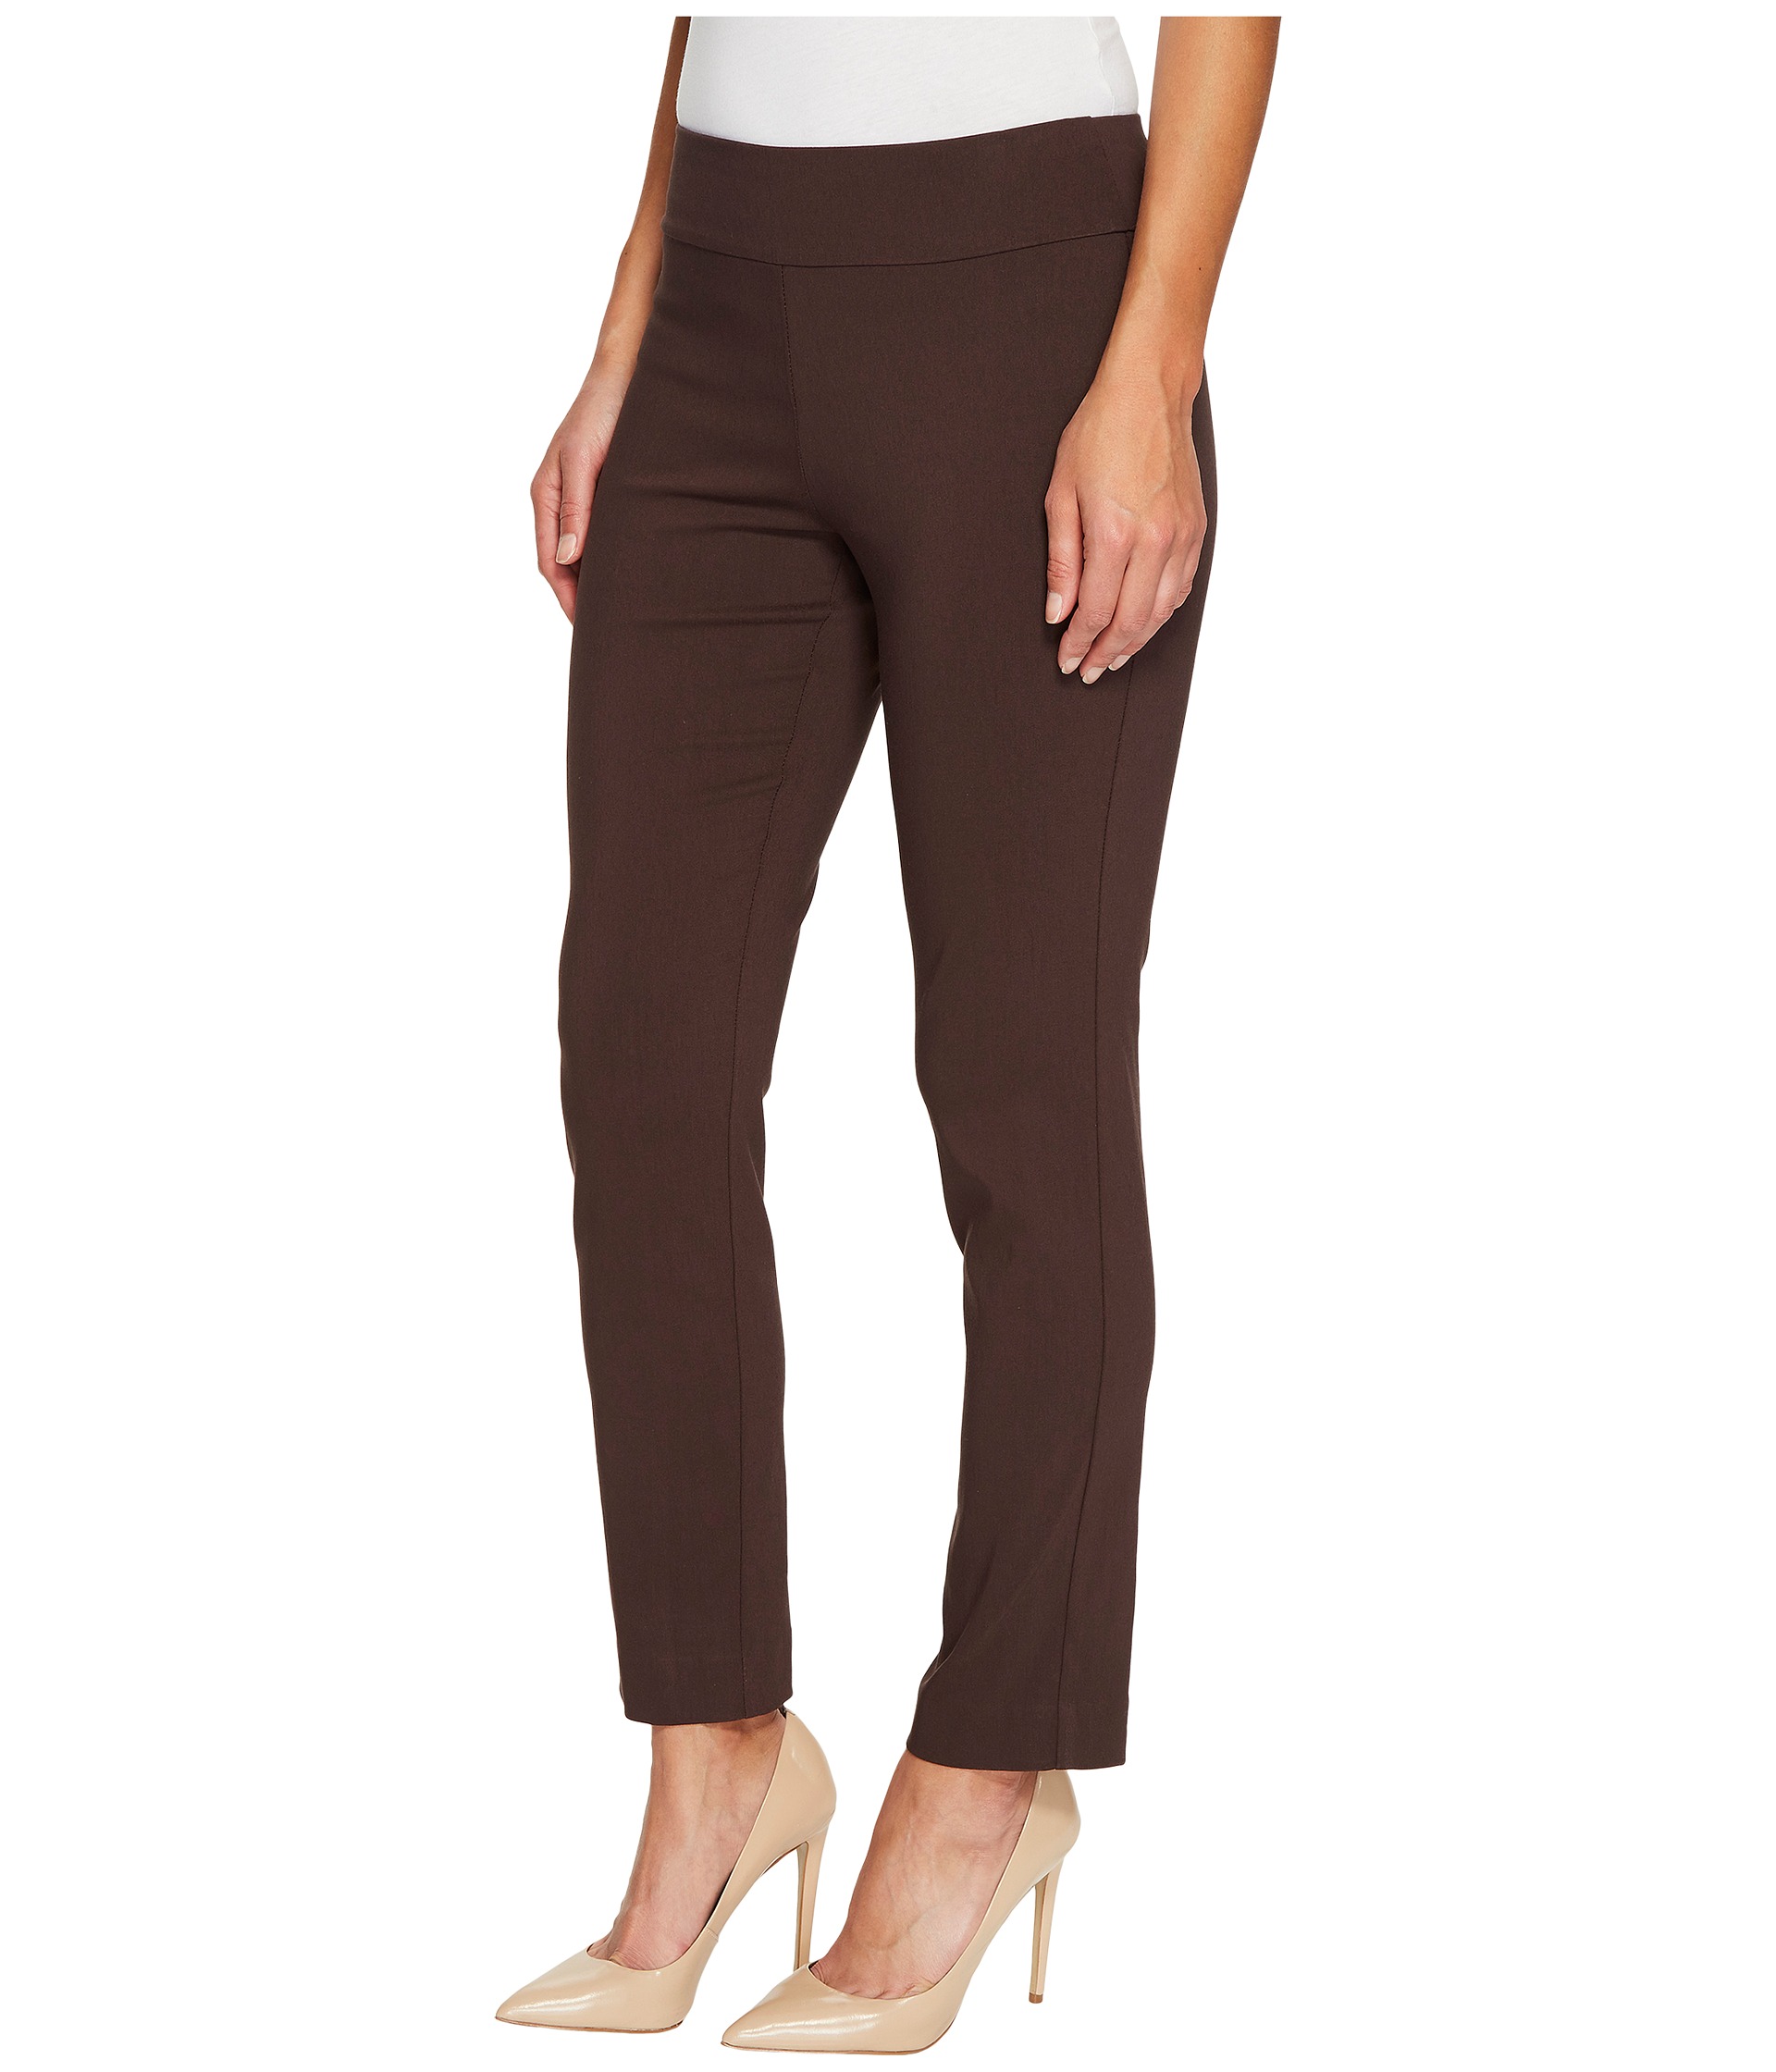 Krazy Larry Pull-On Ankle Pants - Zappos.com Free Shipping BOTH Ways